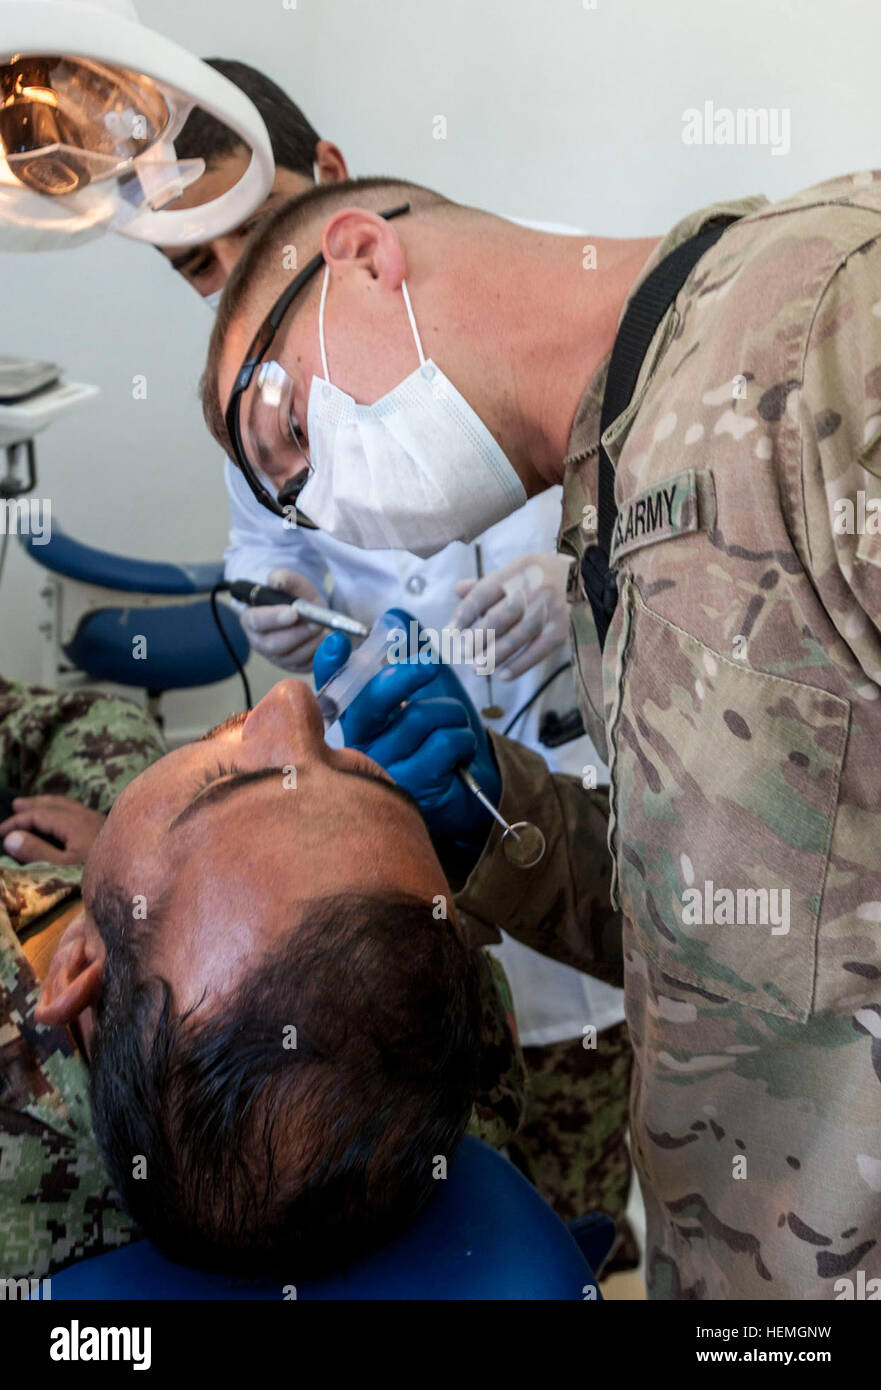 U.S. Army Sgt. Brian Kavanagh, a radiology specialist with Company C, 626th Brigade Support Battalion, 3rd Brigade Combat Team, 101st Airborne Division (Air Assault), inspects a tooth that was drilled for a filling by Afghan National Army (ANA) Dentist Capt. Mirwais Hussaini, 1st Brigade, 203rd Corps at Camp Parsa in Khowst province, Afghanistan, April 14, 2013. The procedure was part of an ongoing partnership between ANA and U.S. Army medical personnel for ANA troops.  (U.S. Army National Guard photo by Sgt. Joshua S. Edwards/Released) Trip to the dentist, How partnership builds a healthier A Stock Photo